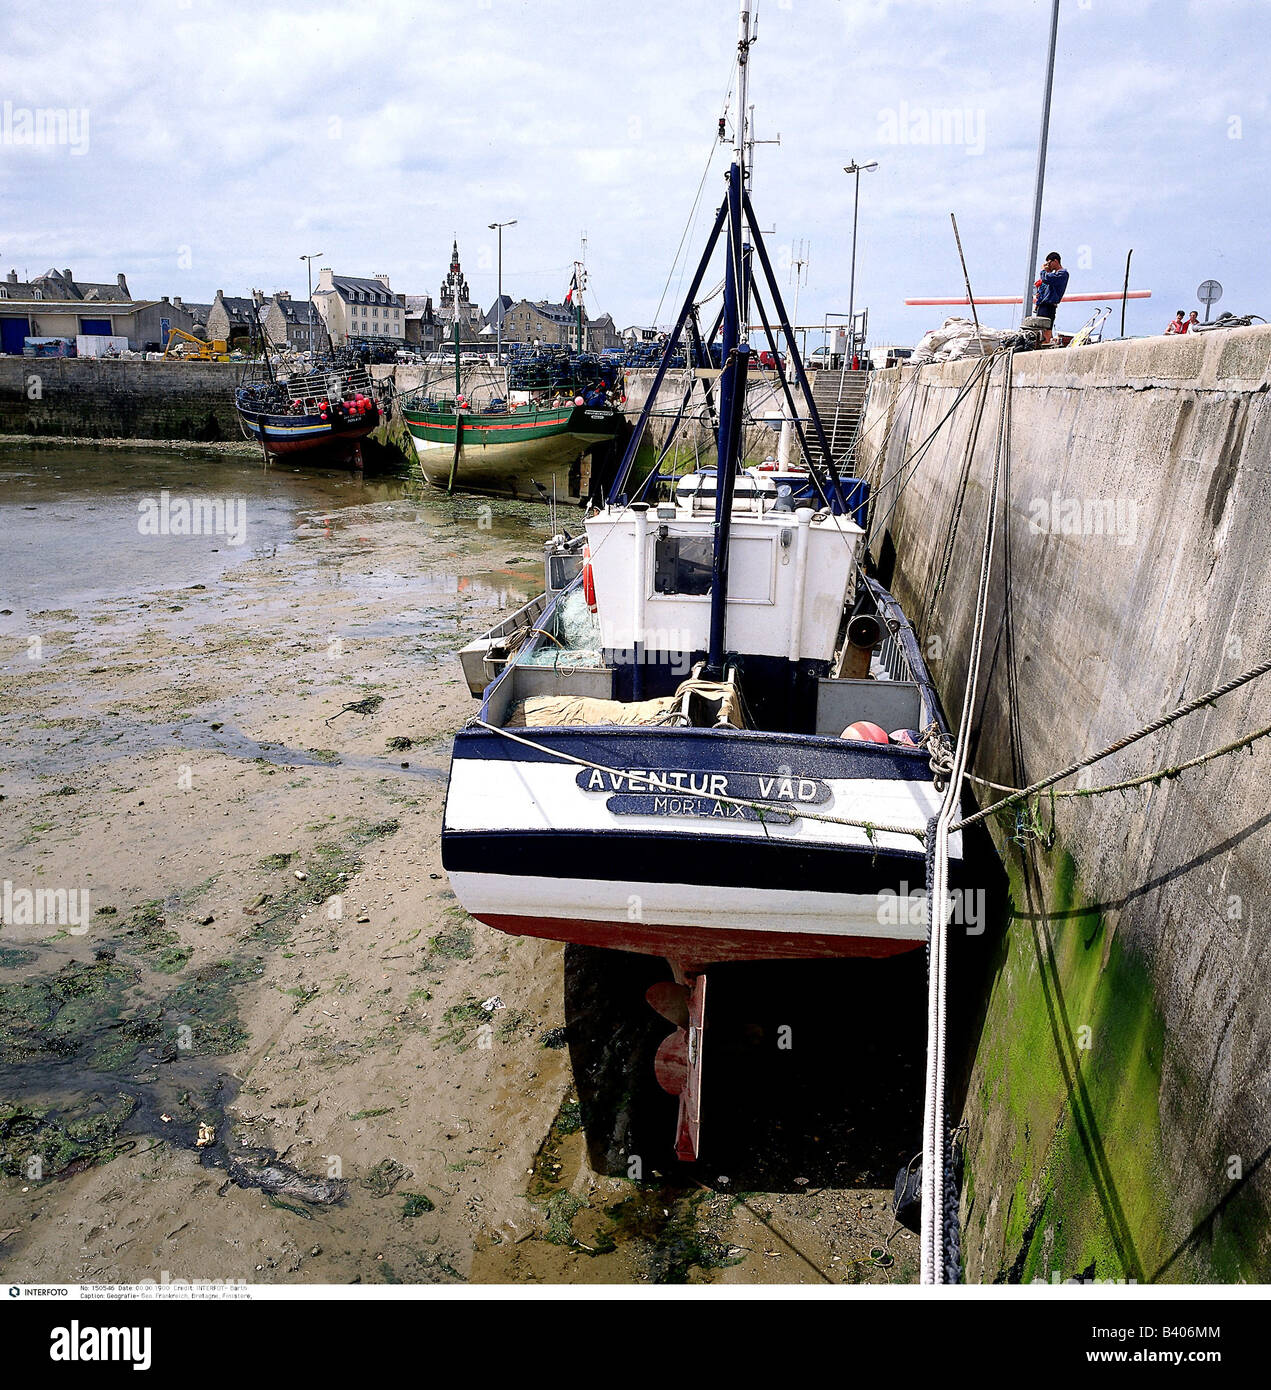 geography / travel, France, Brittany, Finistere, Roscoff, cutter, port, ship, navigation, fishing, Stock Photo